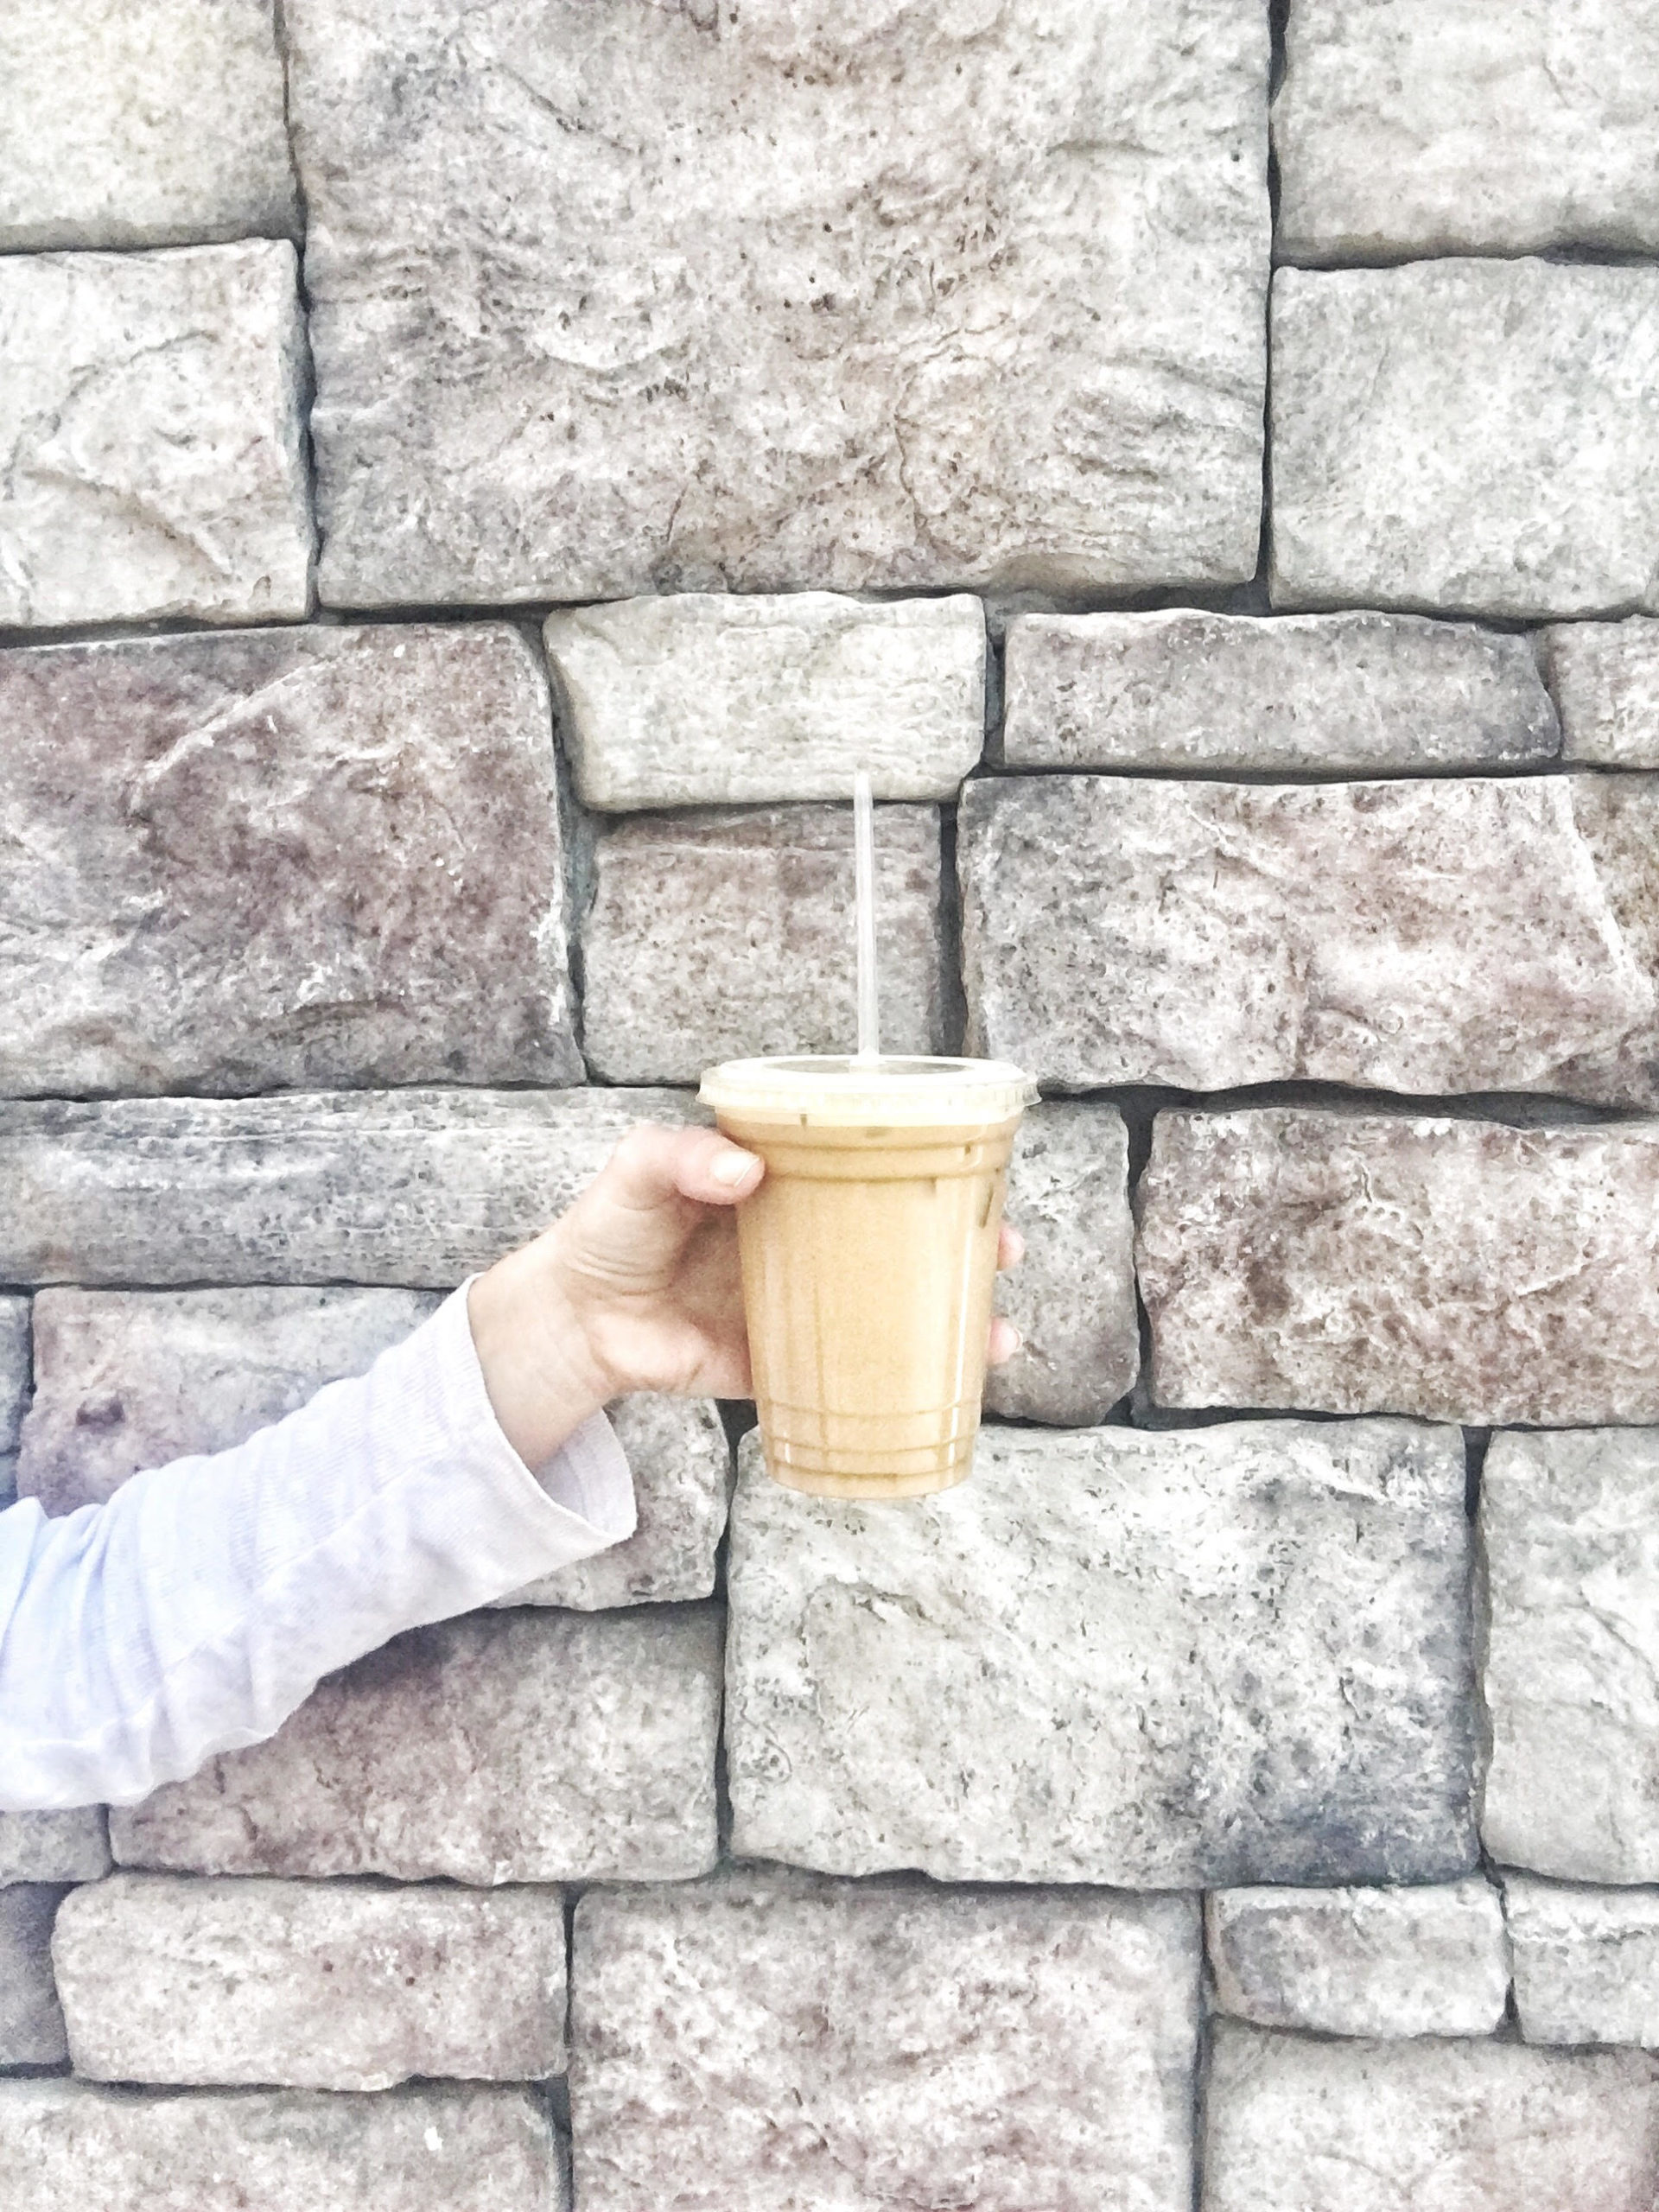 megan holding iced coffee with heavy cream against stone wall